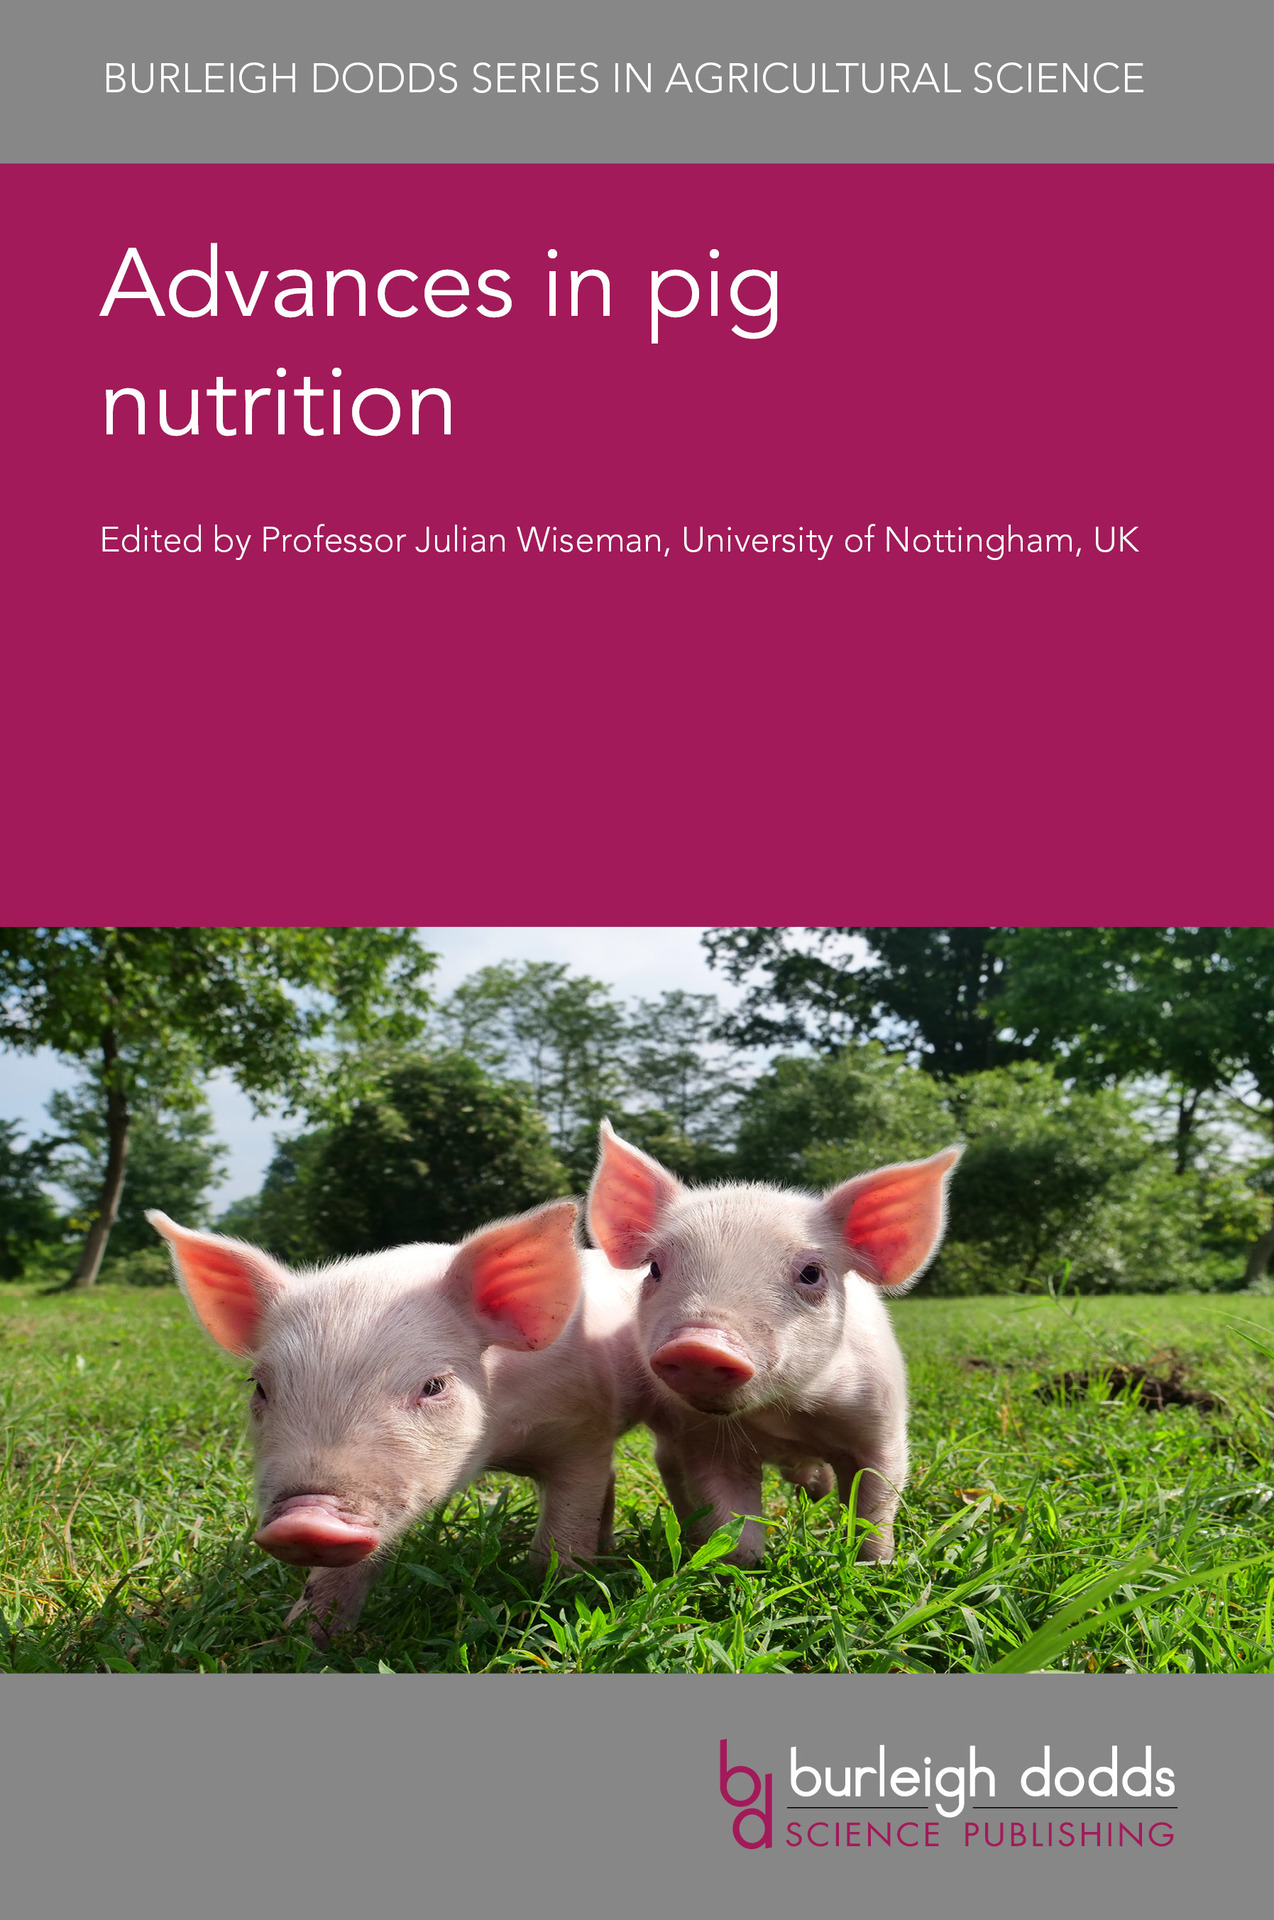 Advances in pig nutrition